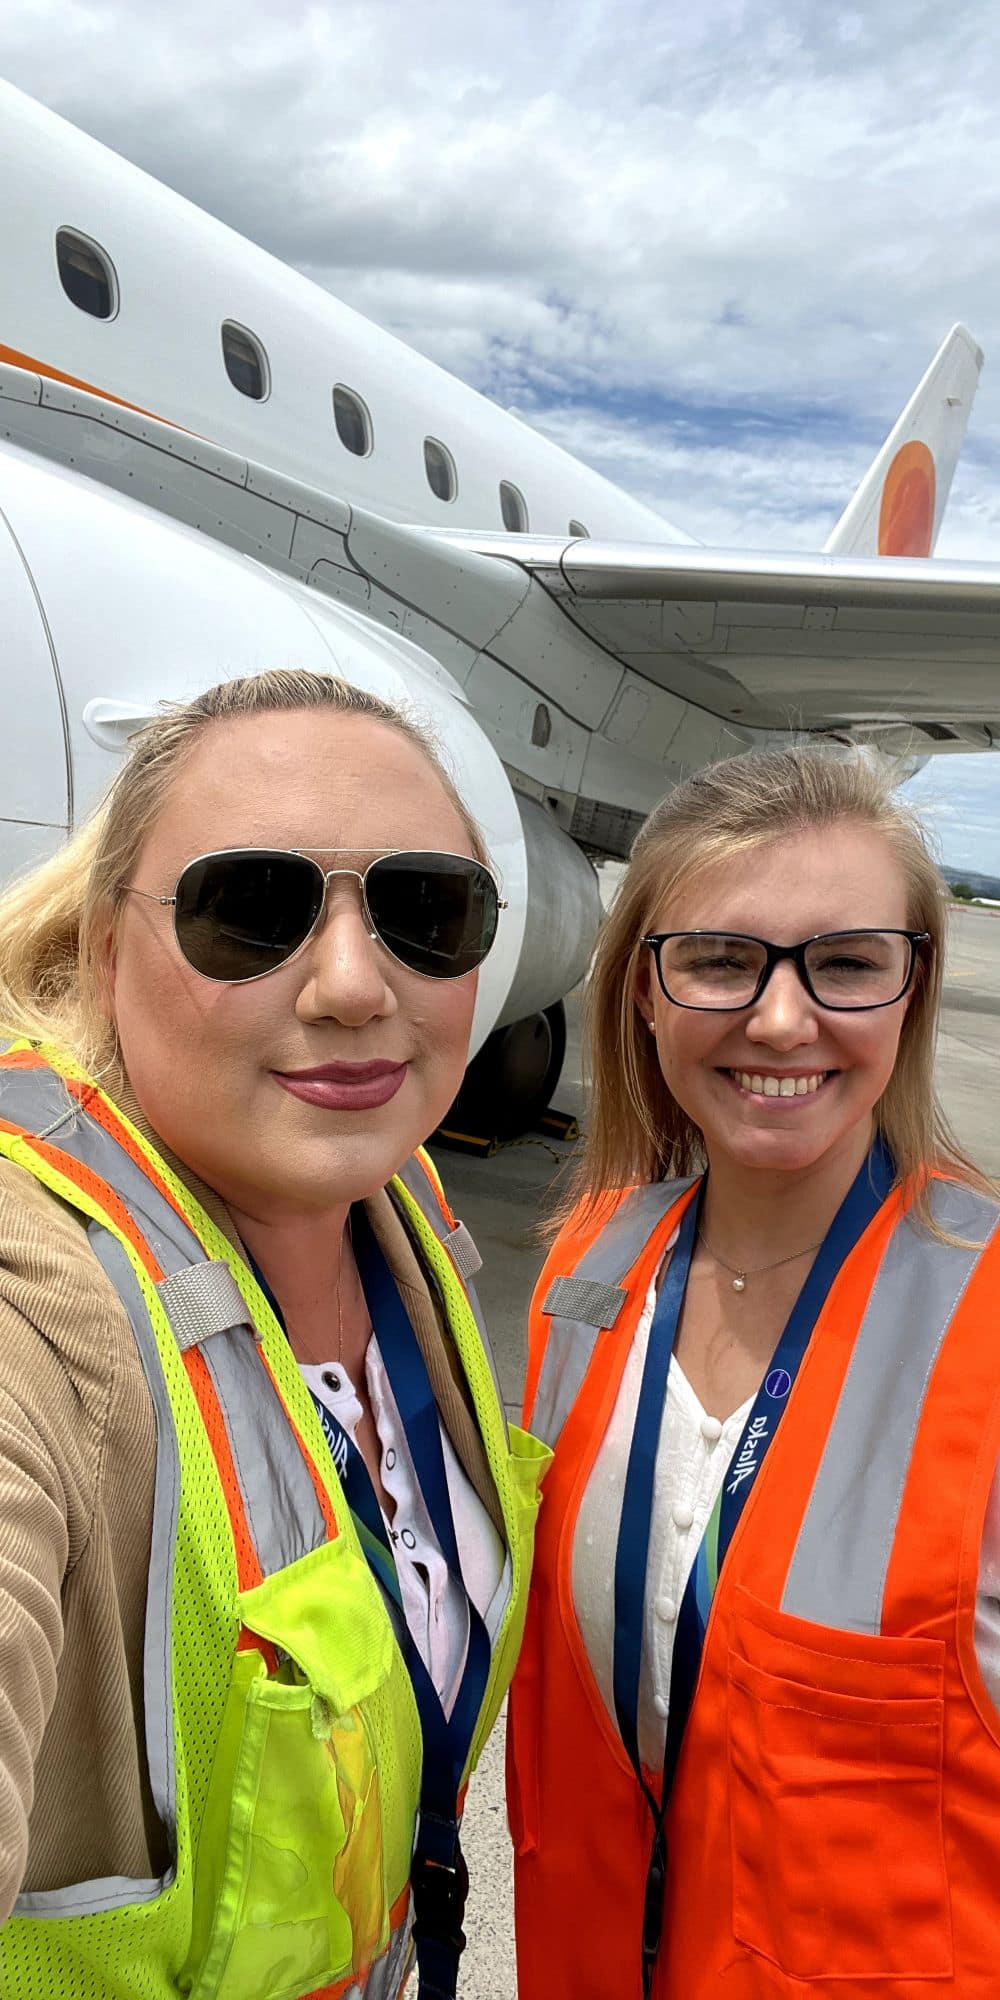 Megan Gill (right) and a fellow intern worked alongside the Horizon Air ground crew in Billings, Montana. (Photo: Megan Gill)